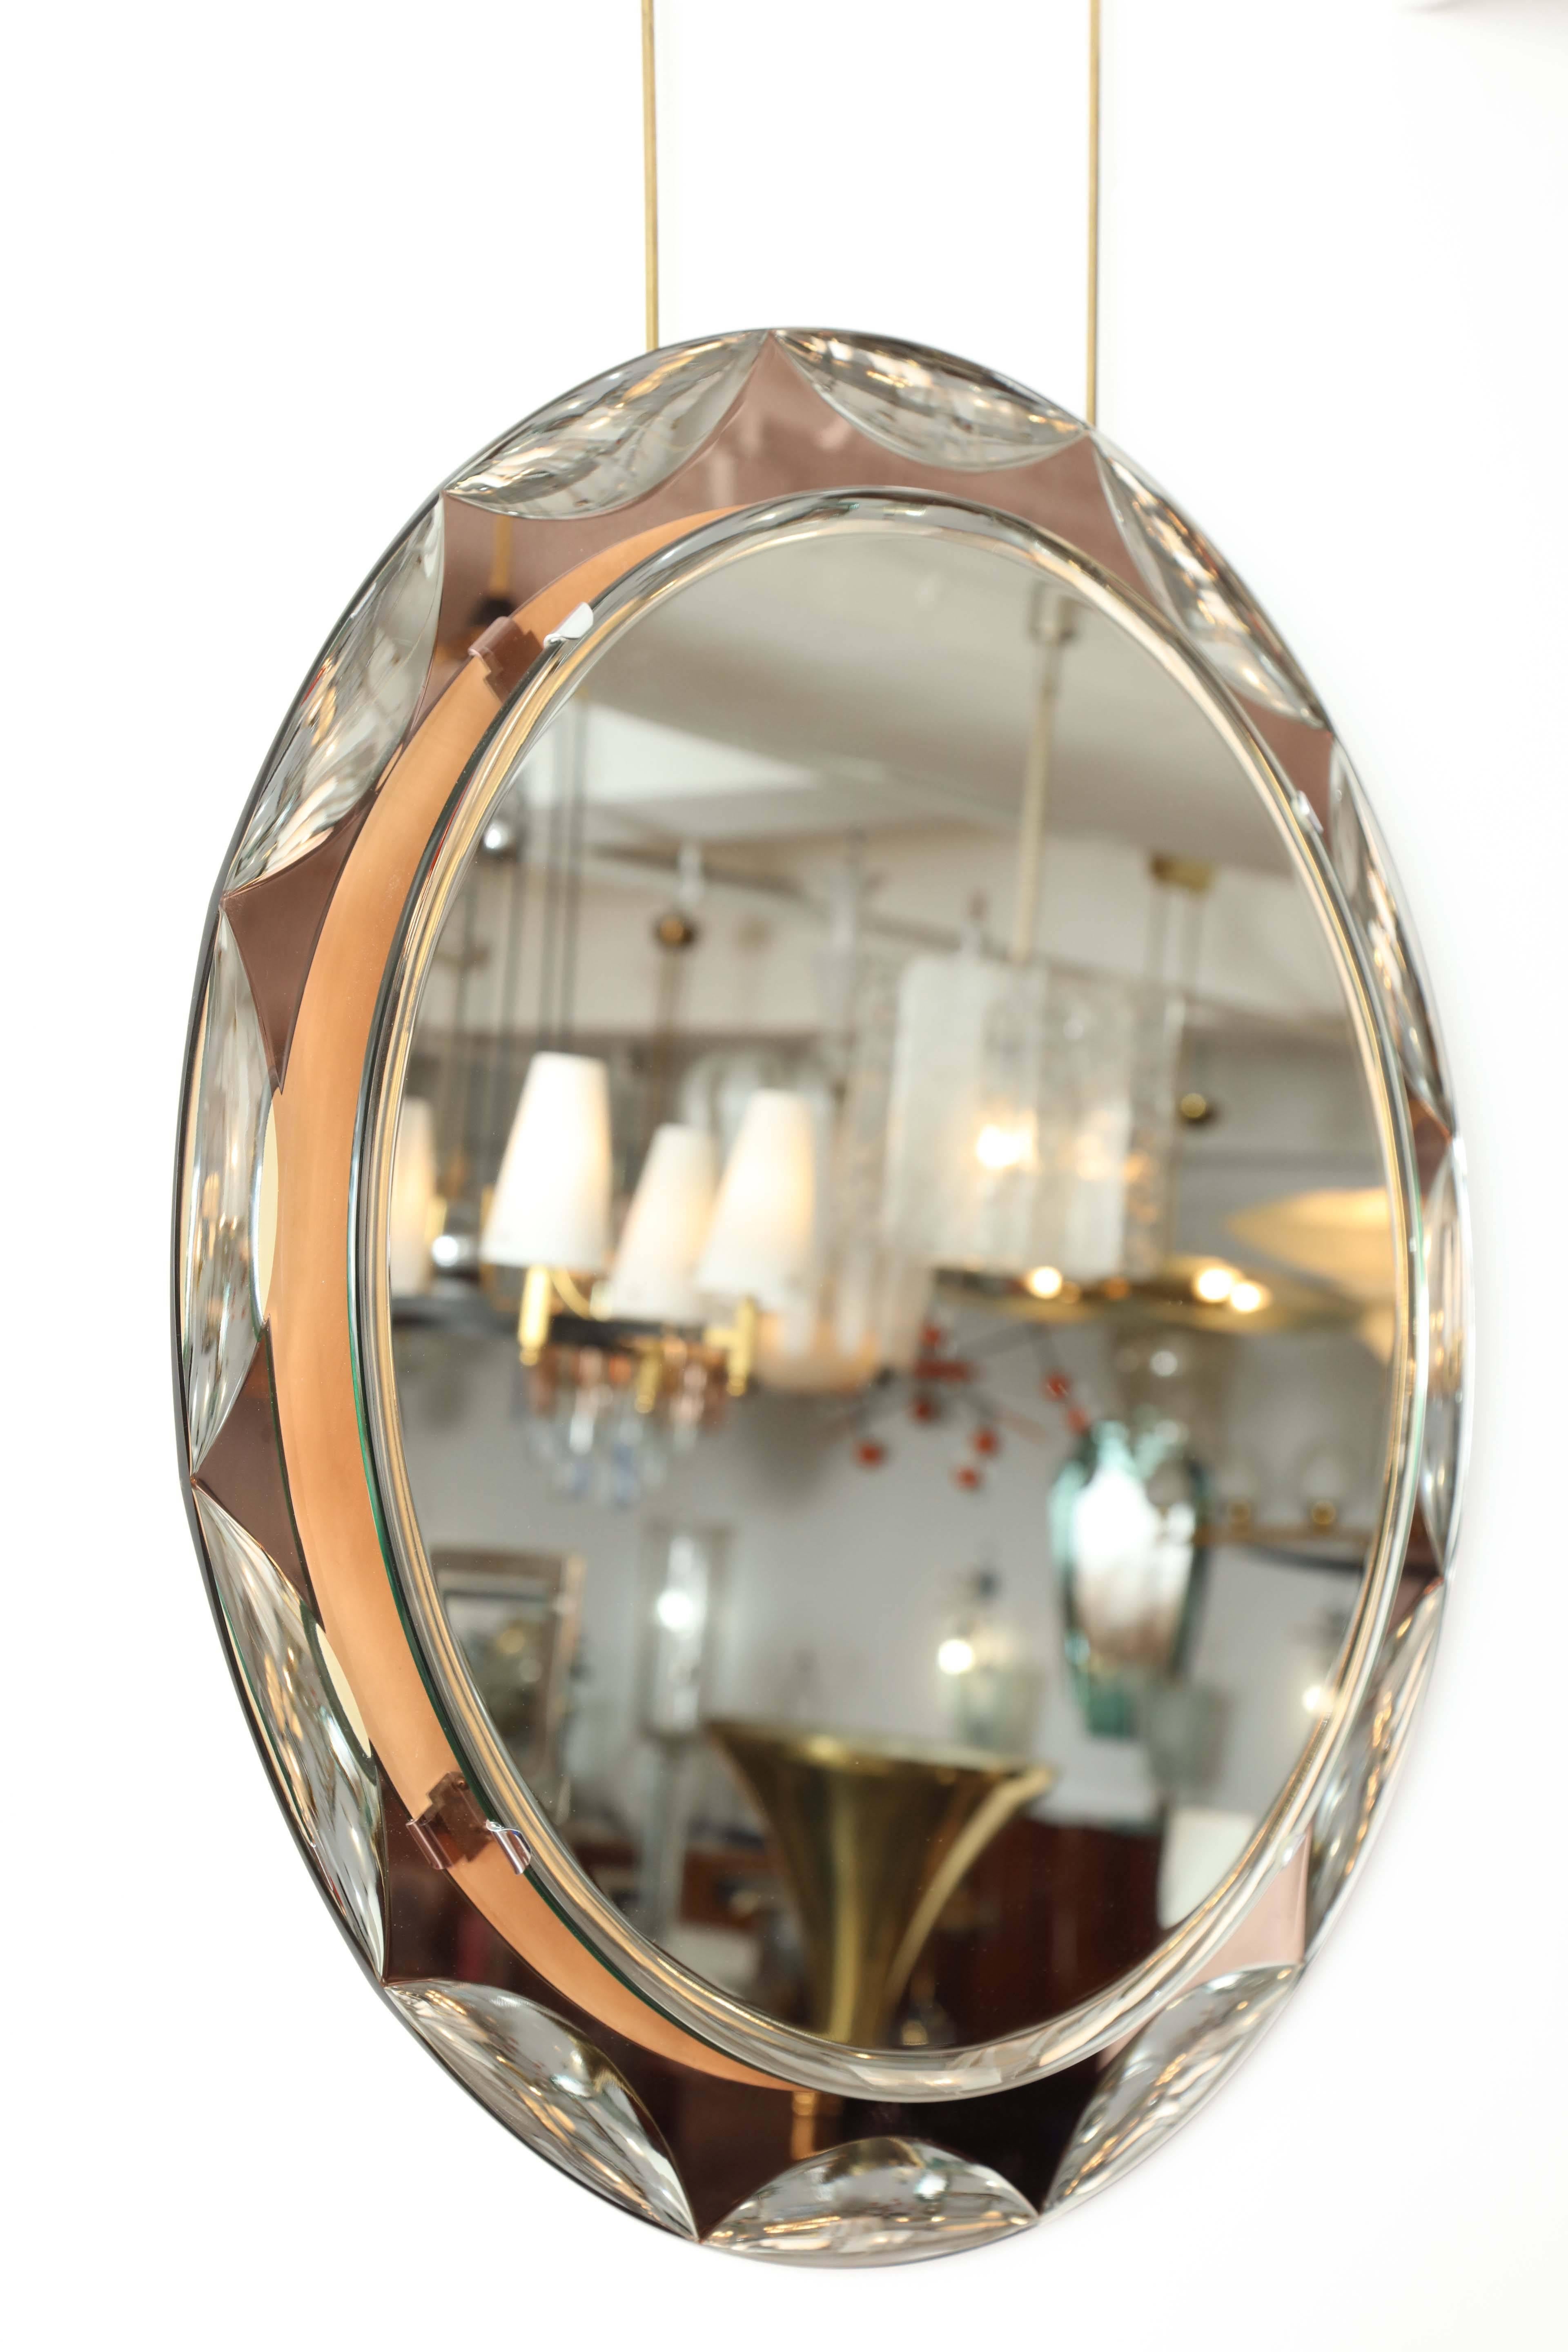 Stunning round beveled scalloped mirror with salmon colored glass frame made in Italy, 1955 by Crystal Arte, unusual beautiful quality.